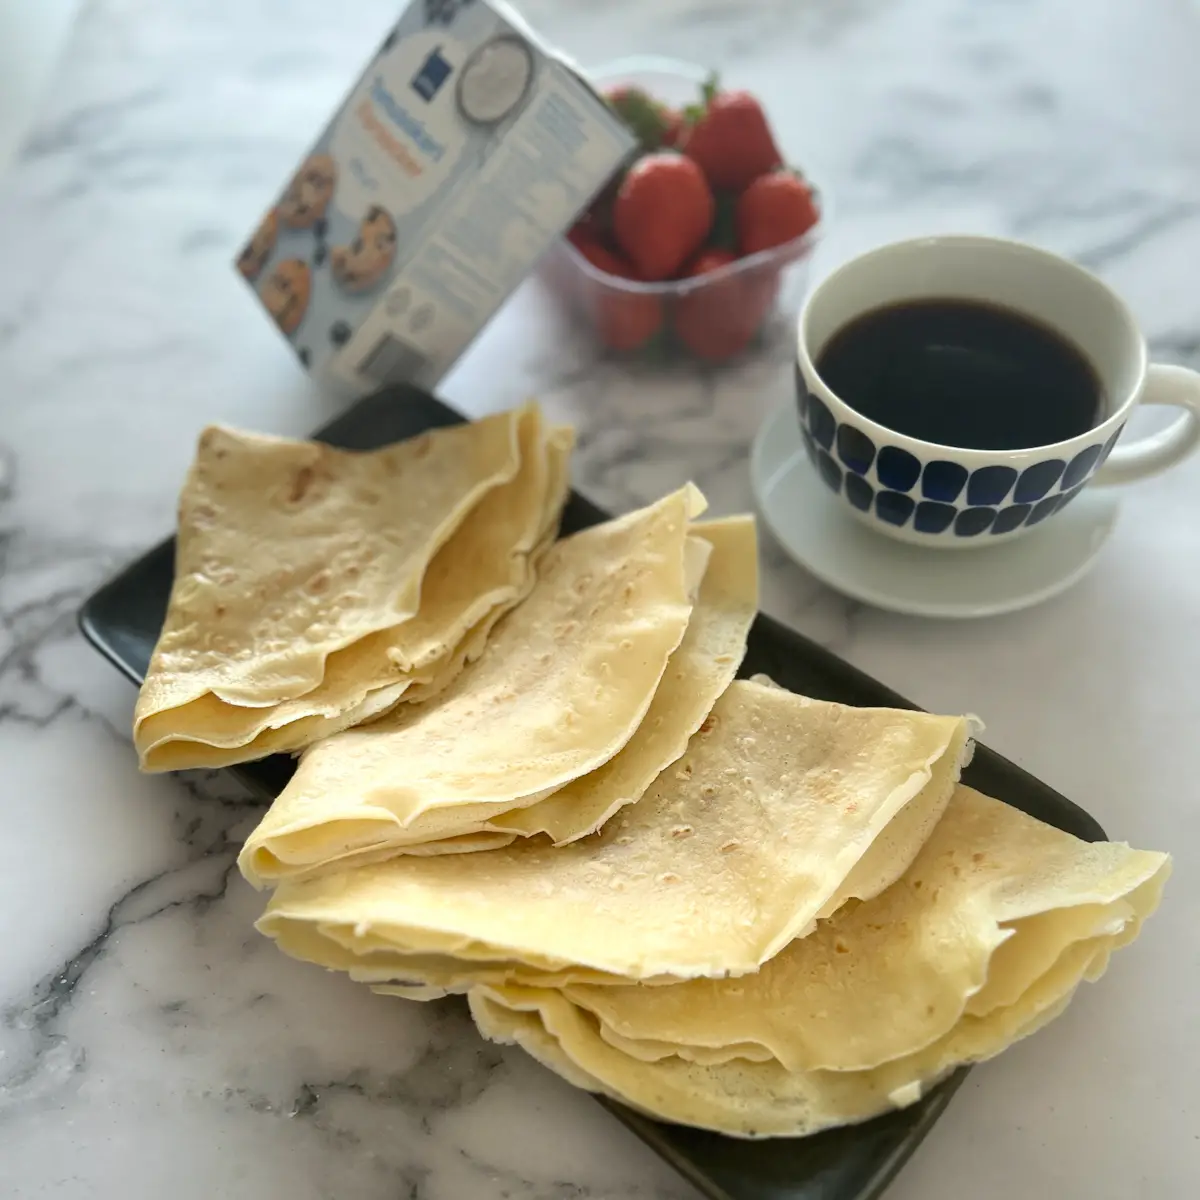 4 crepes folded on a dark blue tray on a table, served with coffee. A powdered sugar package and a box with fresh strawberries are on the table.